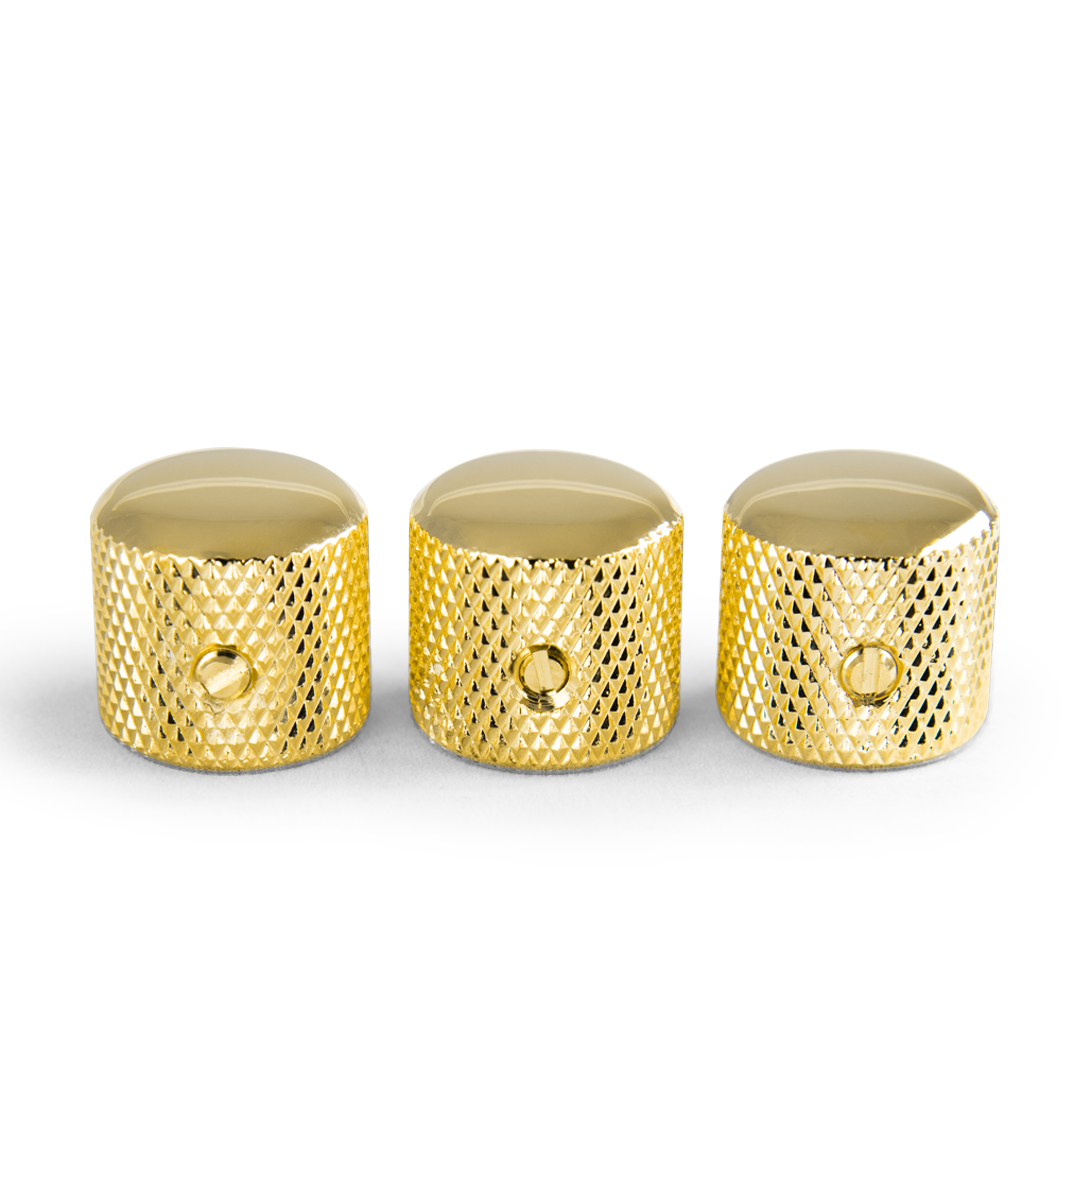 920D Custom Metal Knurled Gold Dome Top Knobs for Strat® (3 Pack) - 920D-MK-1G-PACK